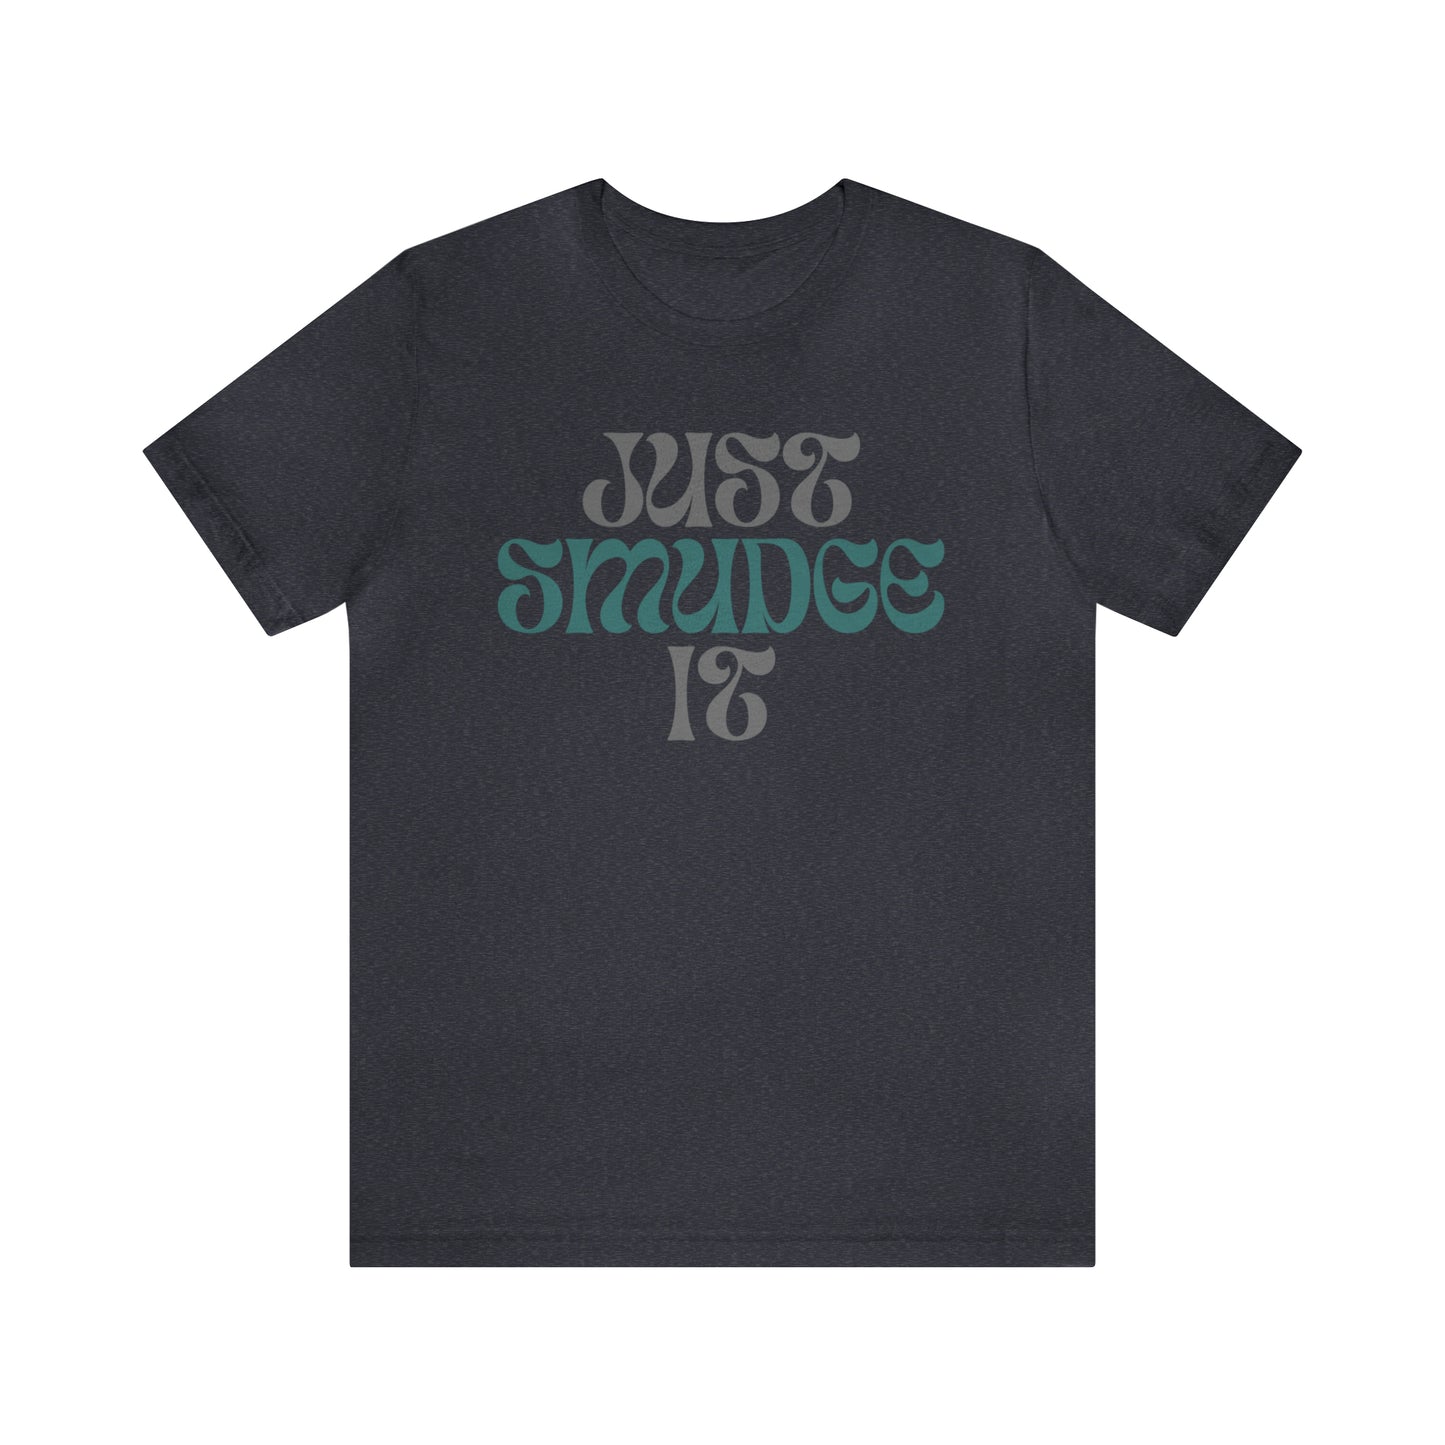 Just Smudge it. Inspirational Jersey Short Sleeve Tee